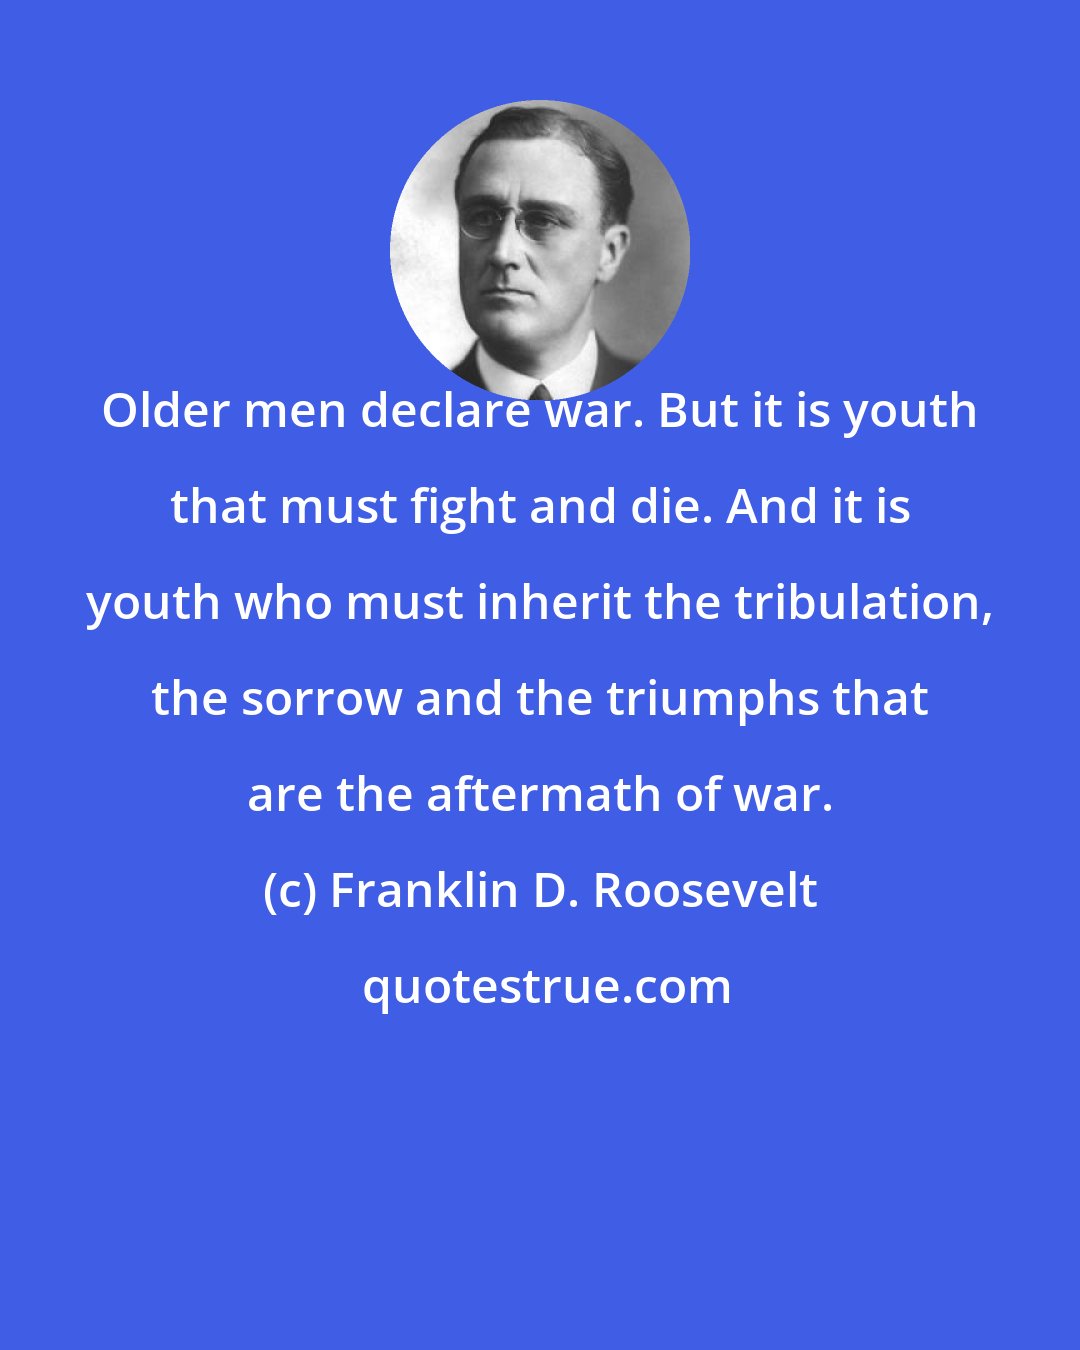 Franklin D. Roosevelt: Older men declare war. But it is youth that must fight and die. And it is youth who must inherit the tribulation, the sorrow and the triumphs that are the aftermath of war.